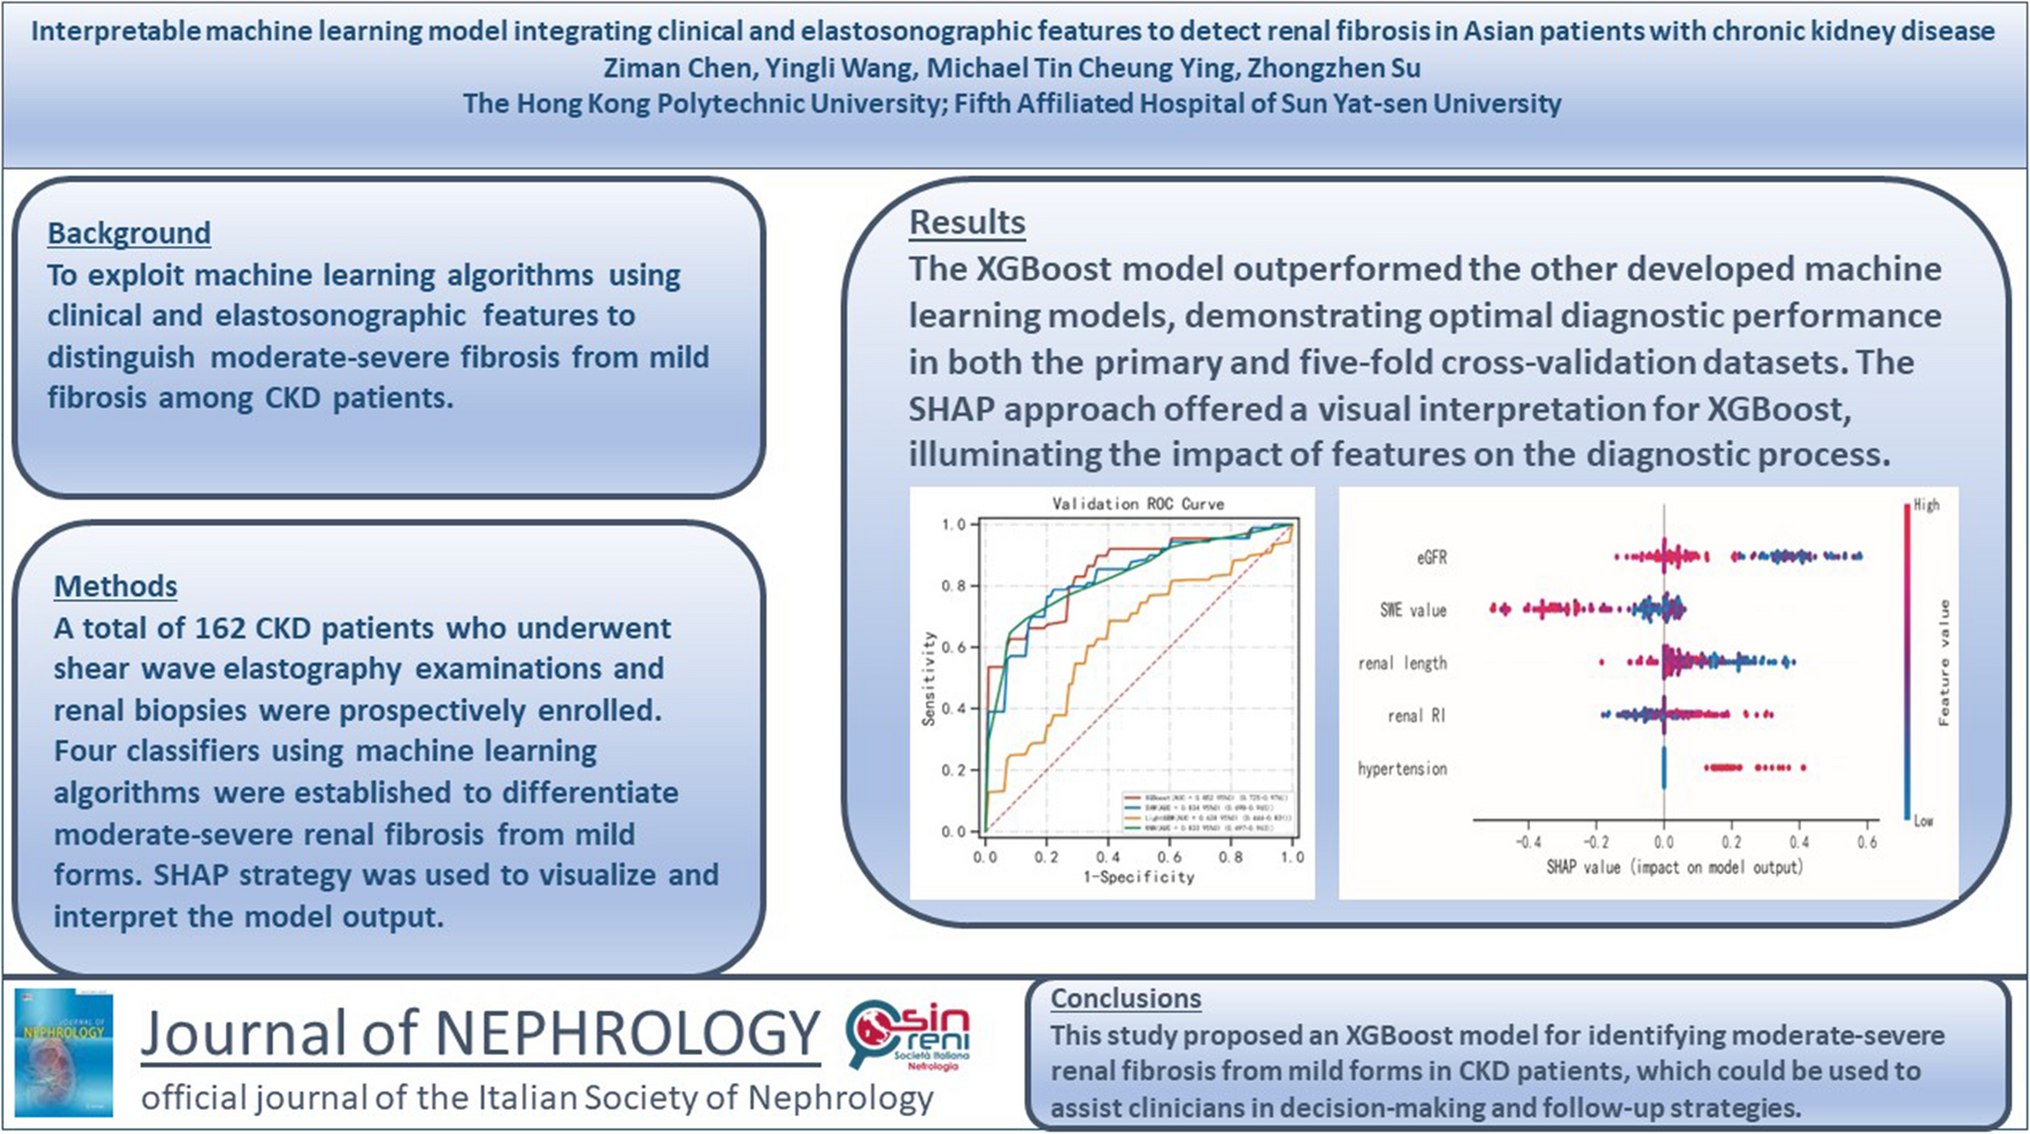 Interpretable machine learning model integrating clinical and elastosonographic features to detect renal fibrosis in Asian patients with chronic kidney disease